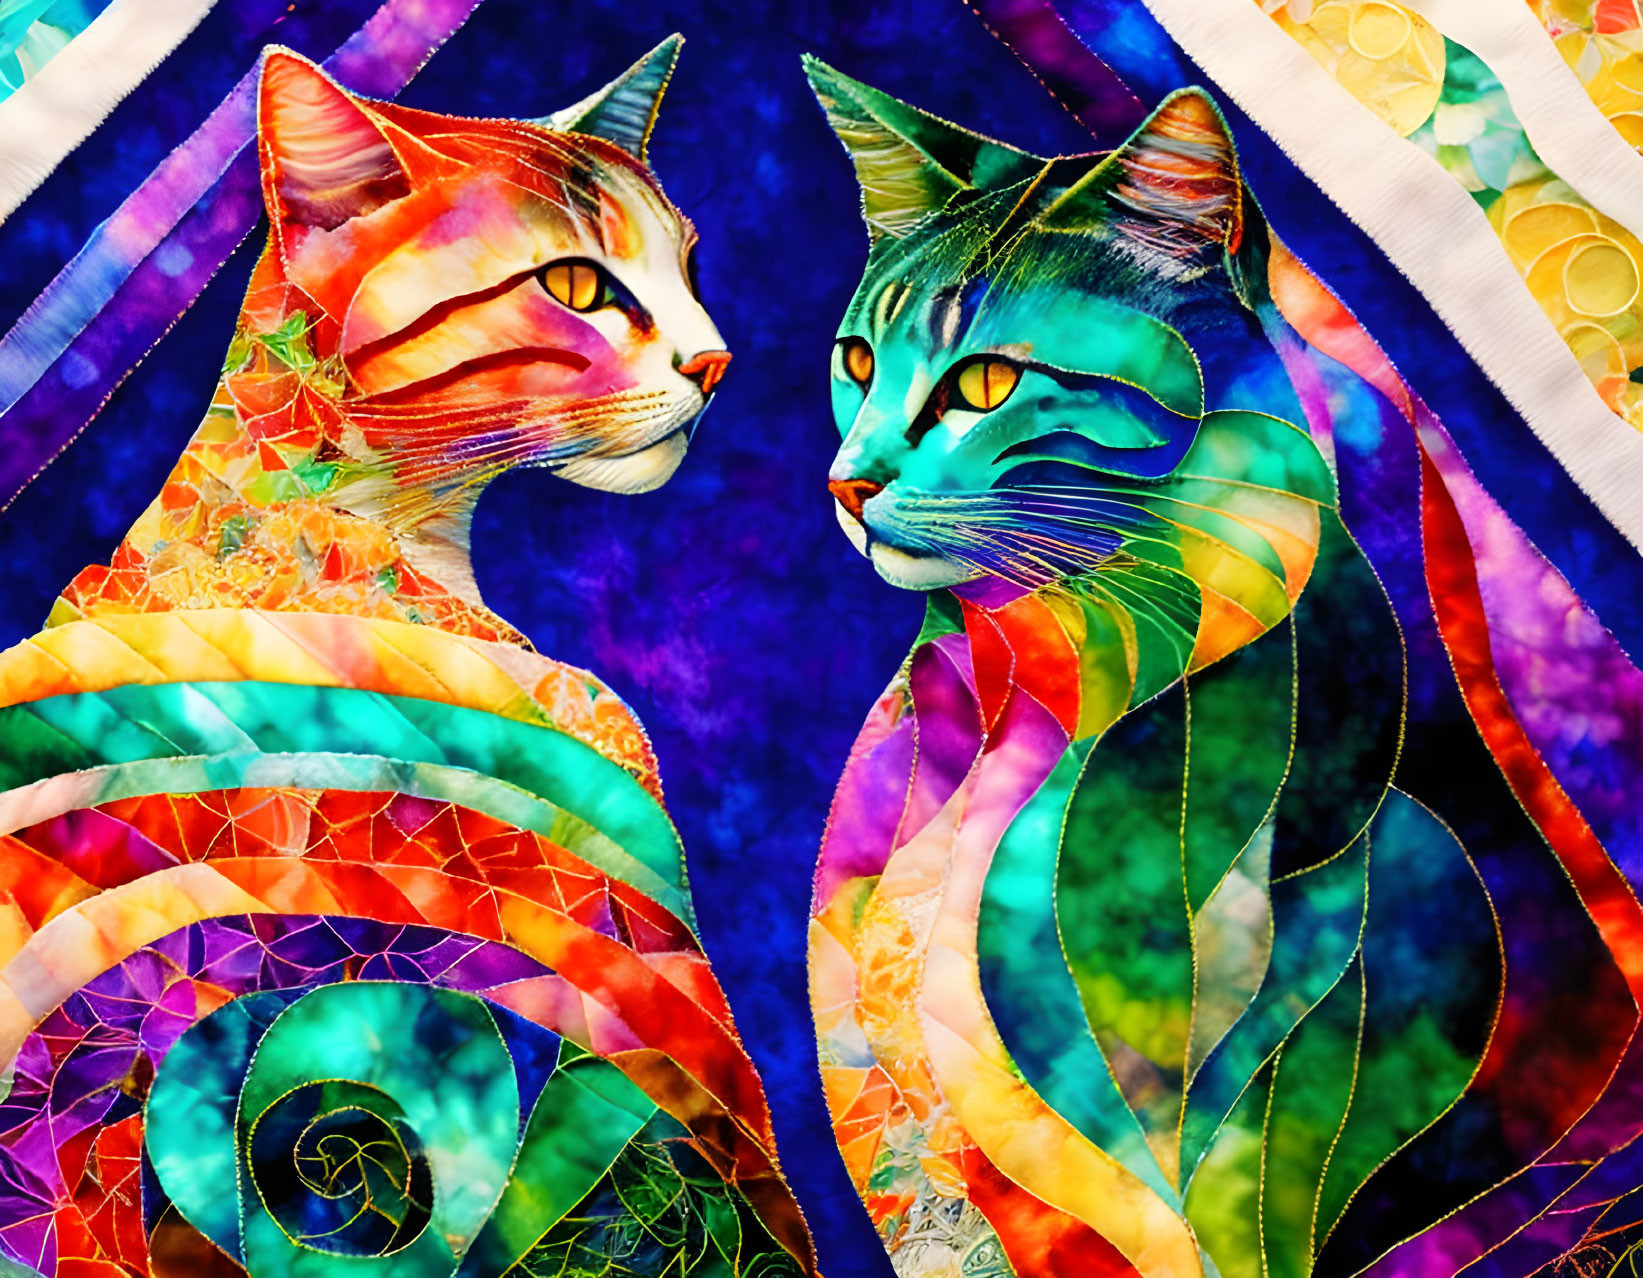 Vibrantly colored mosaic-style illustrated cats on blue and purple stained-glass background